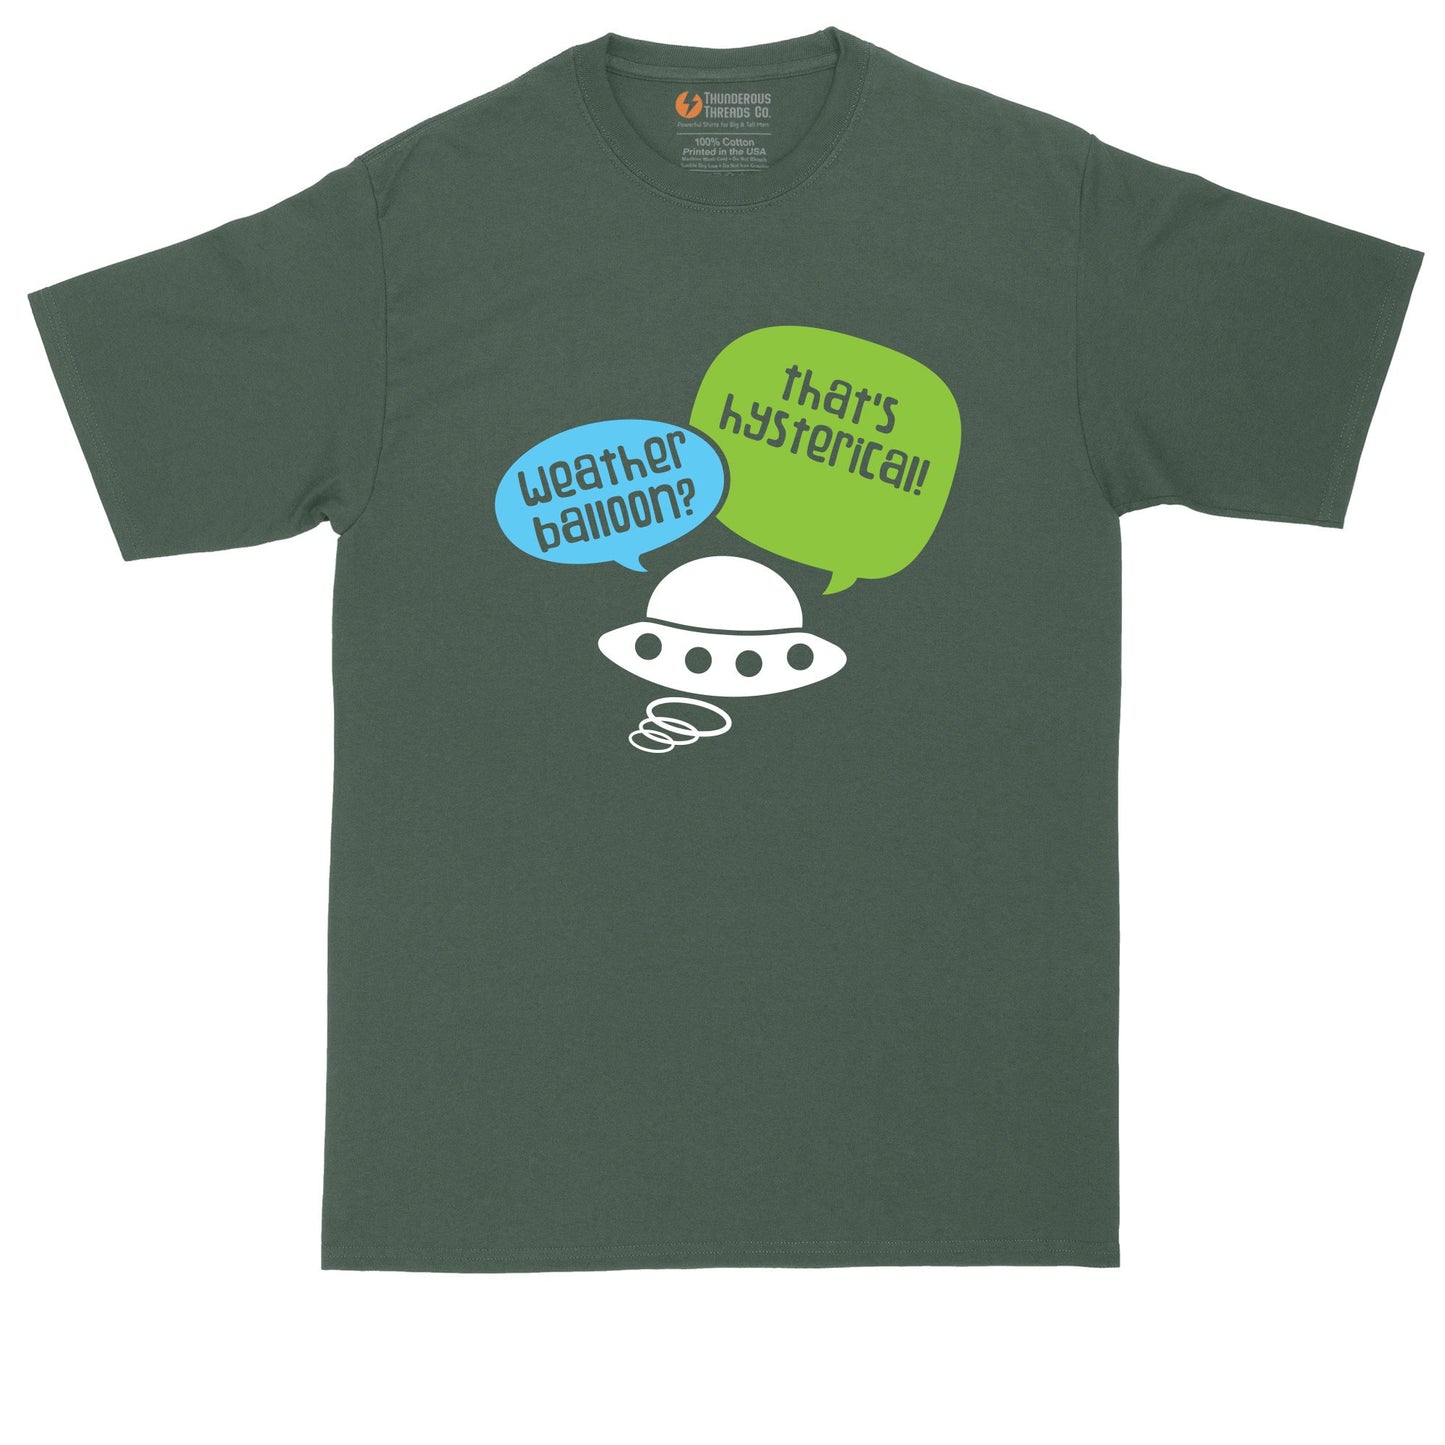 Weather Balloon That's Hysterical | Alien T-Shirt | Mens Big and Tall T-Shirt